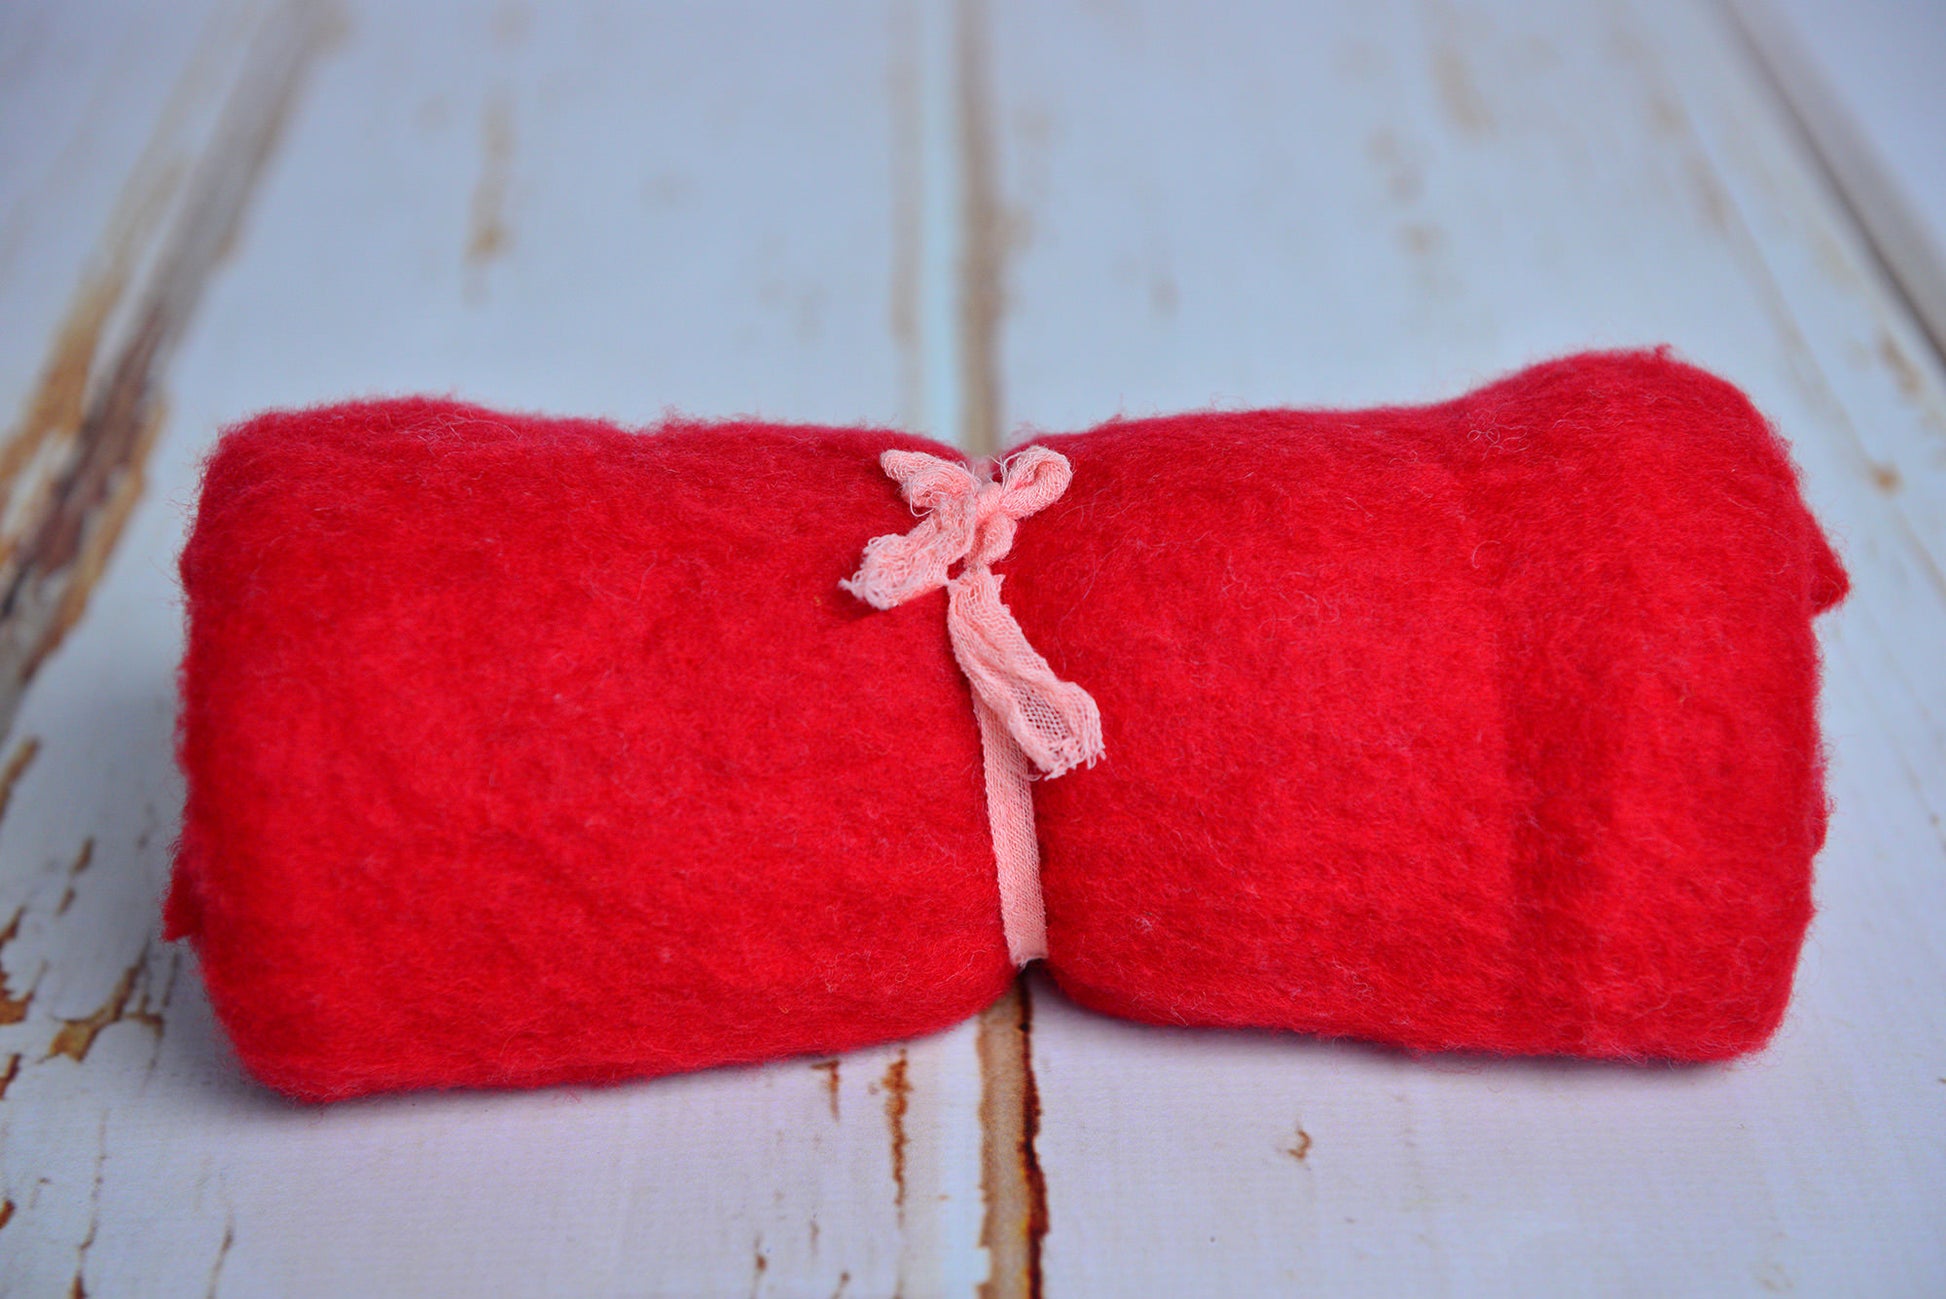 Wool Wrap - Red-Newborn Photography Props